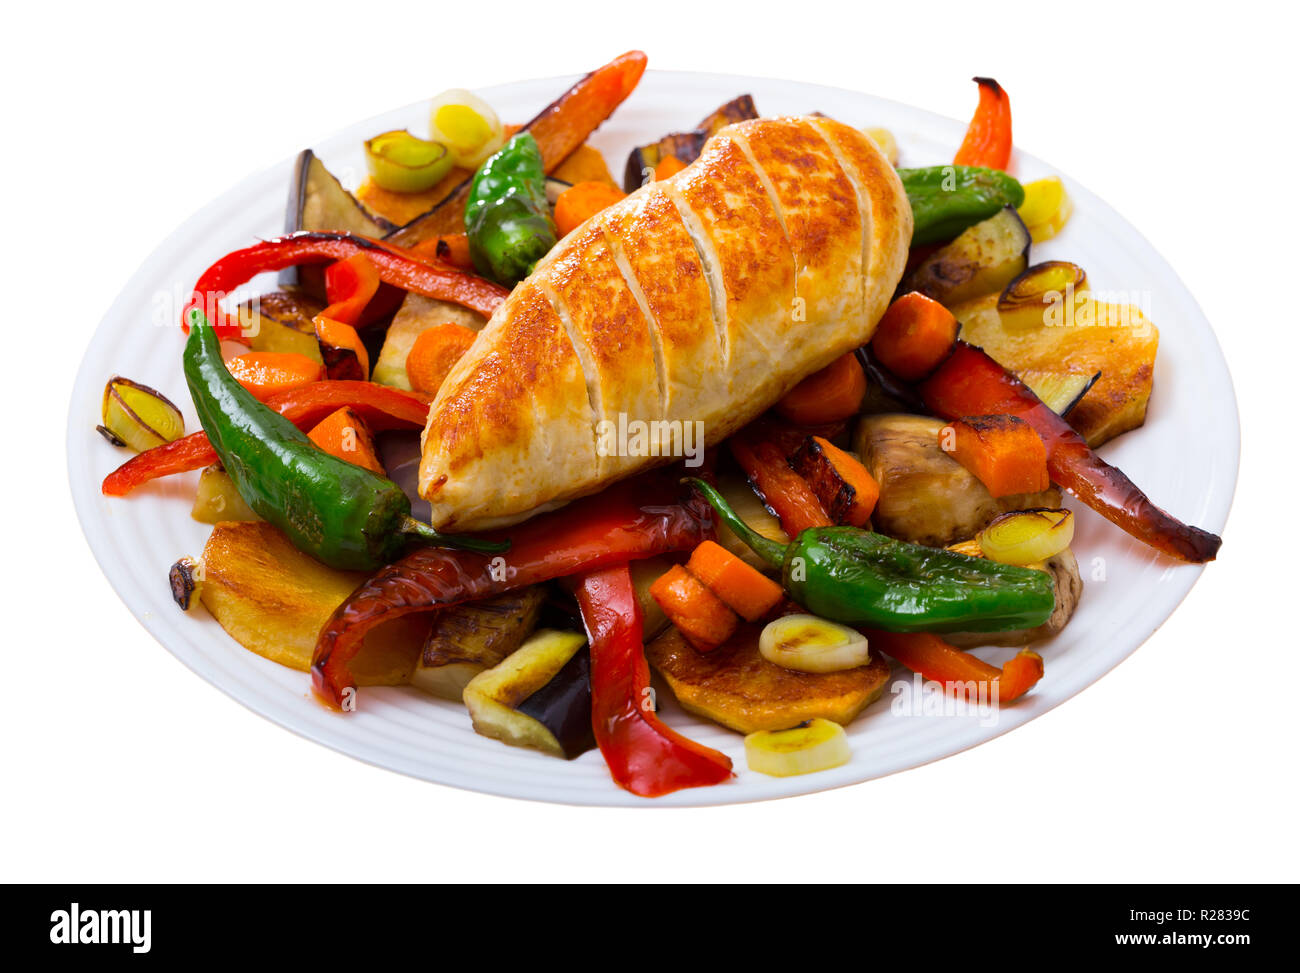 Top view  of tasty baked different vegetables with chicken fillet at plate. Isolated over white background Stock Photo